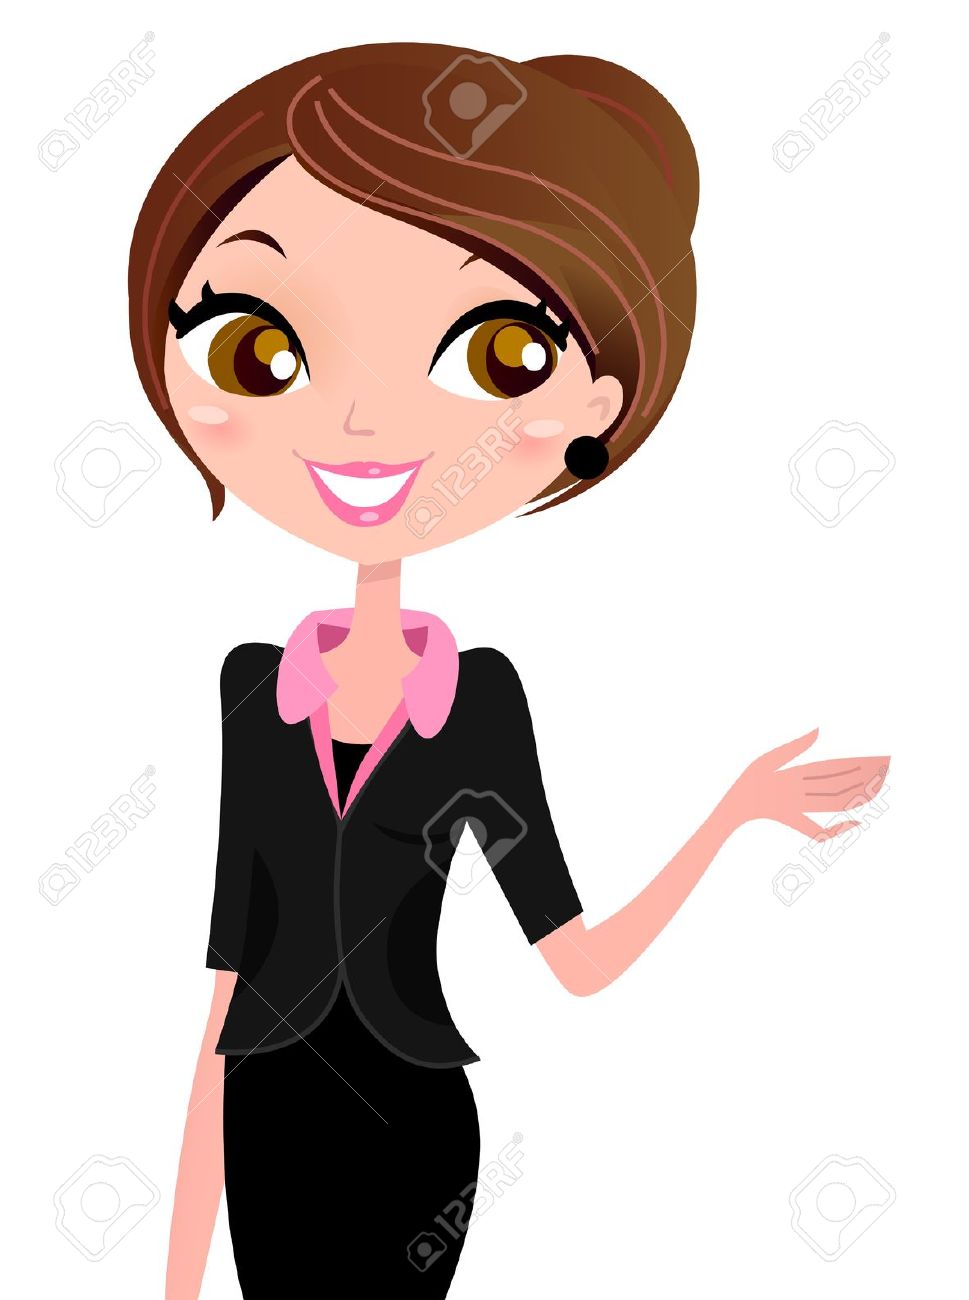 female manager clipart - Clipground